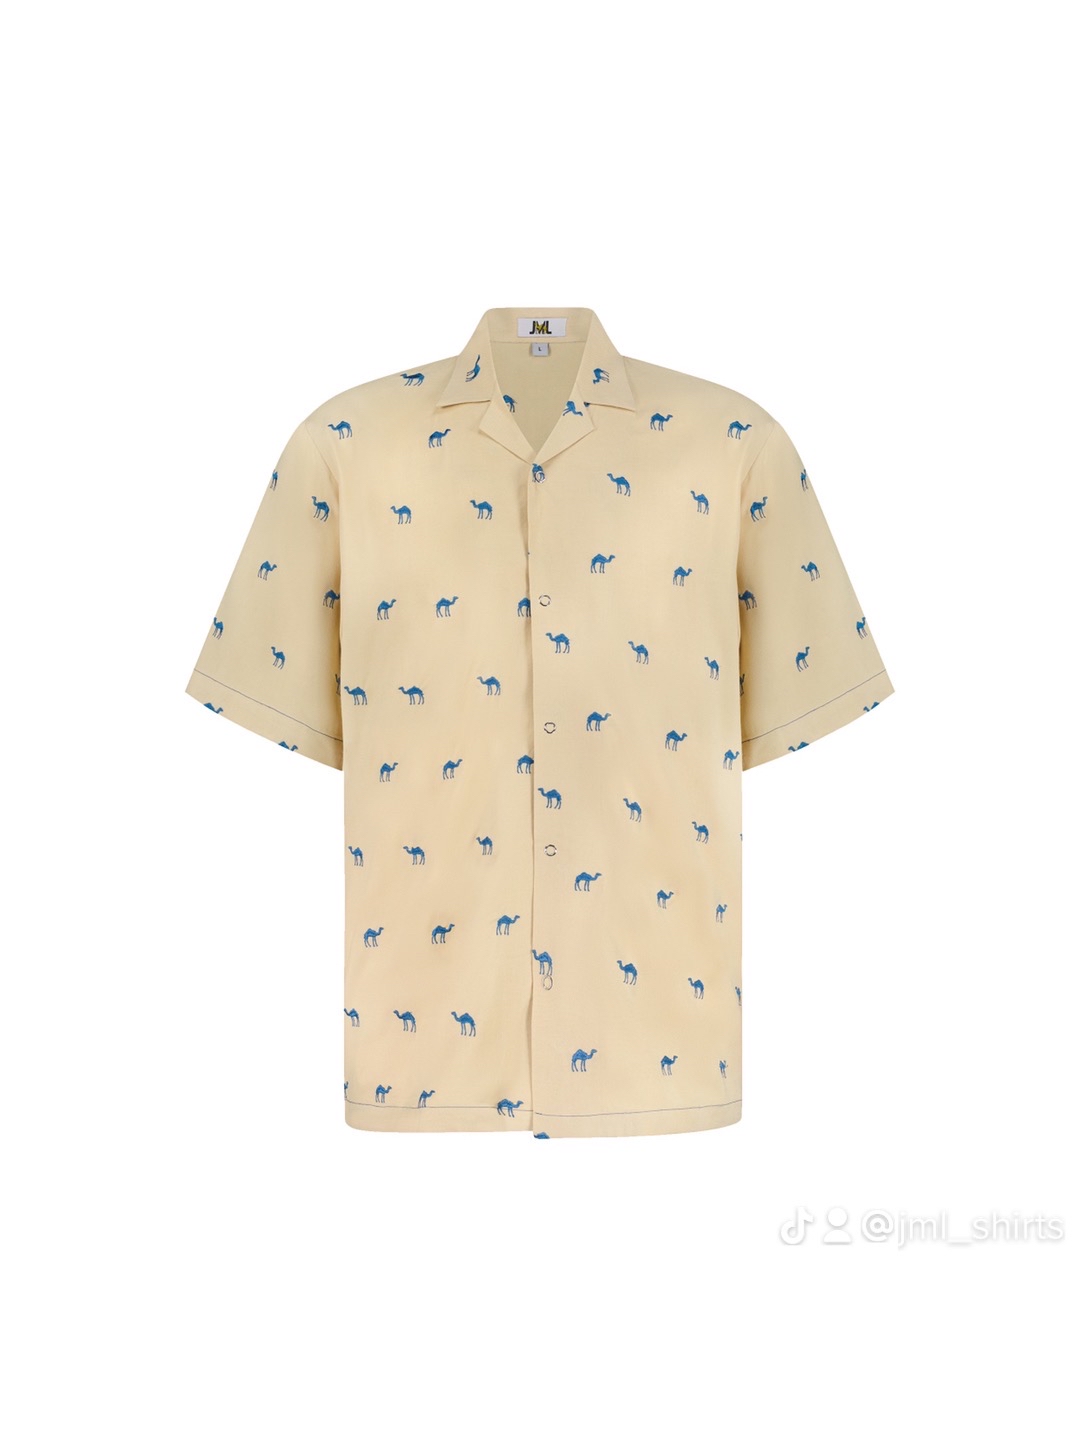 Beige shirt with blue camel embroidery